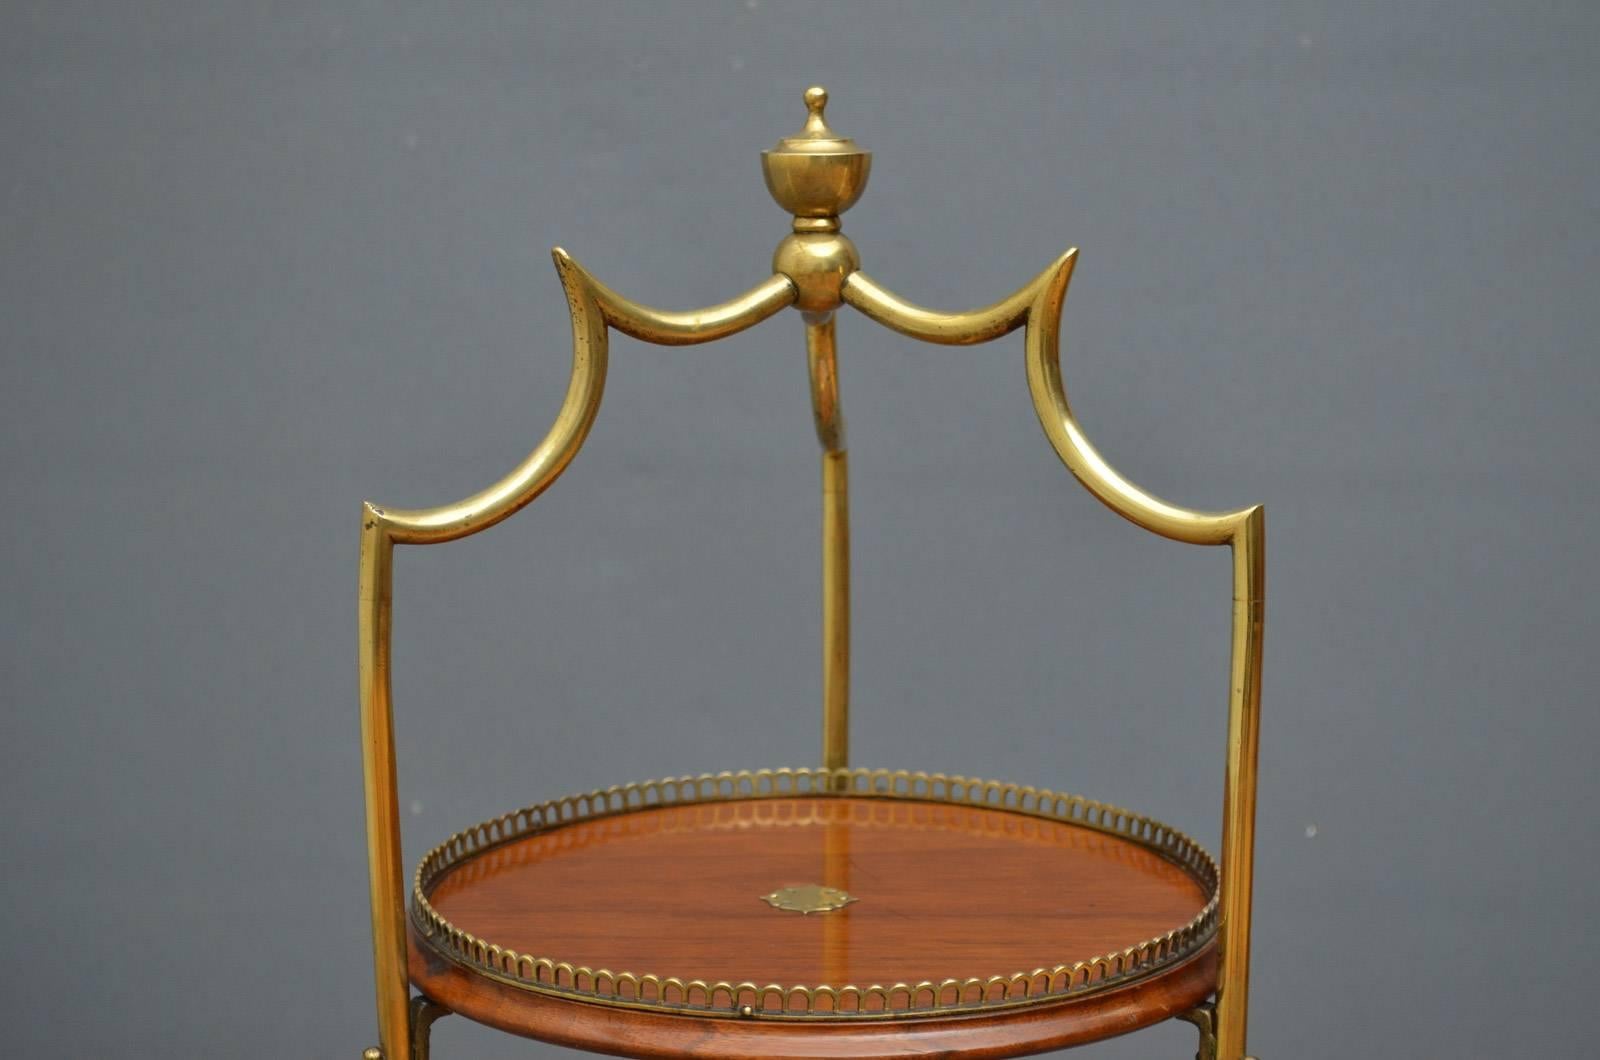 Sn4331, stylish Victorian cake stand with three walnut tiers each with brass gallery and three brass supports, all in excellent original condition, circa 1880
Measure: Height 34